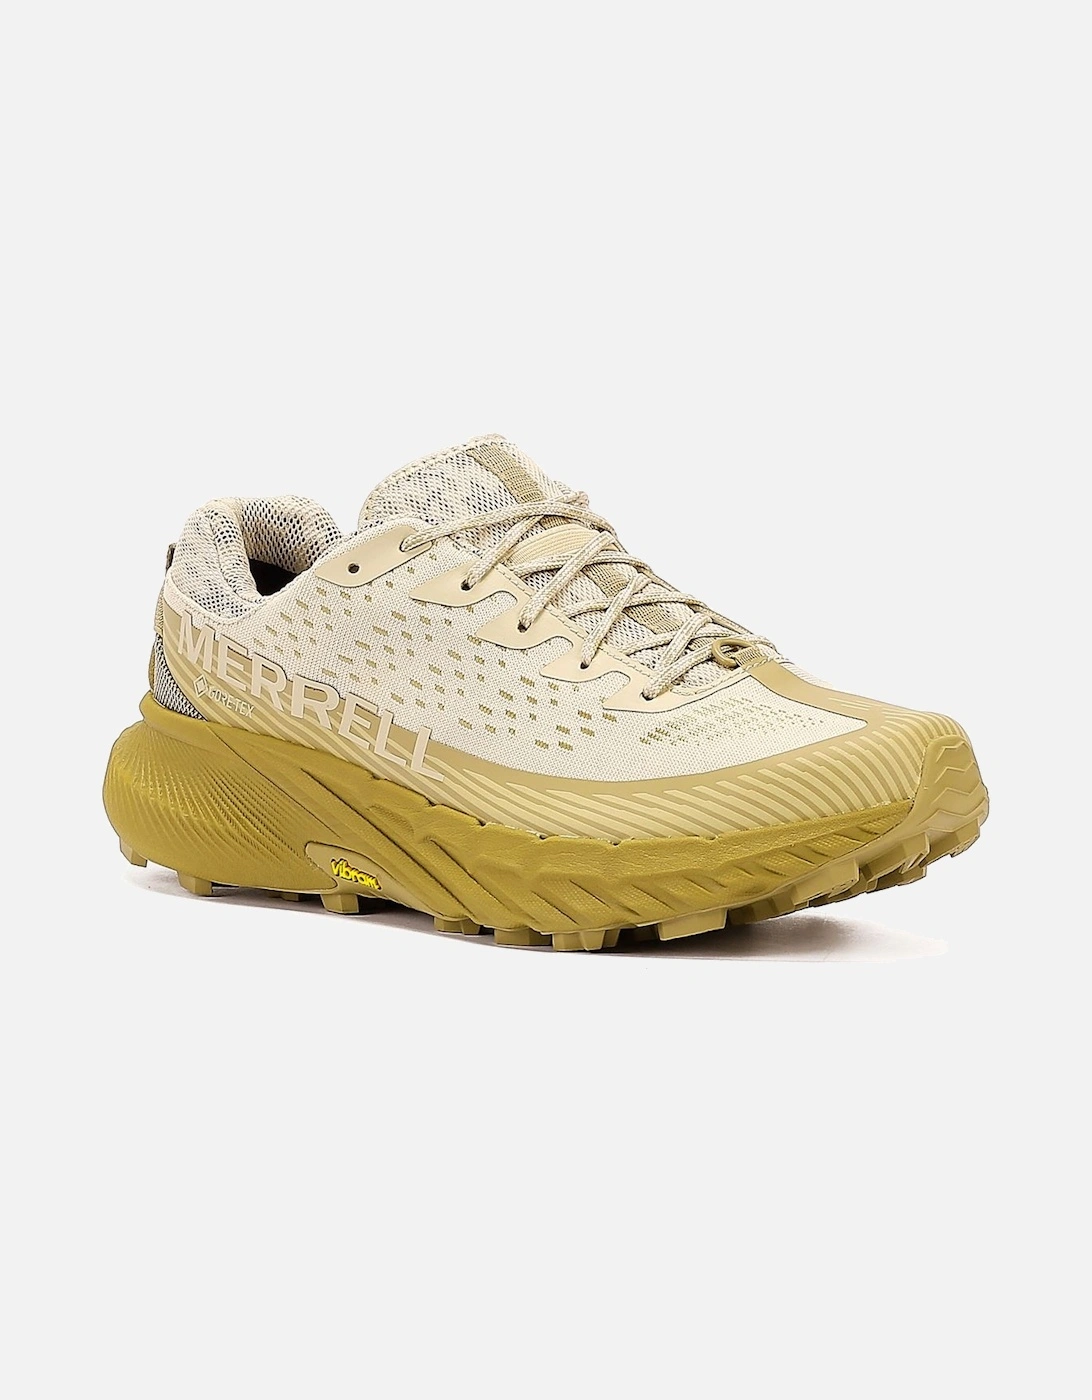 Agility Peak 5 Gore-Tex Men's Oyster/Coyote Trainers